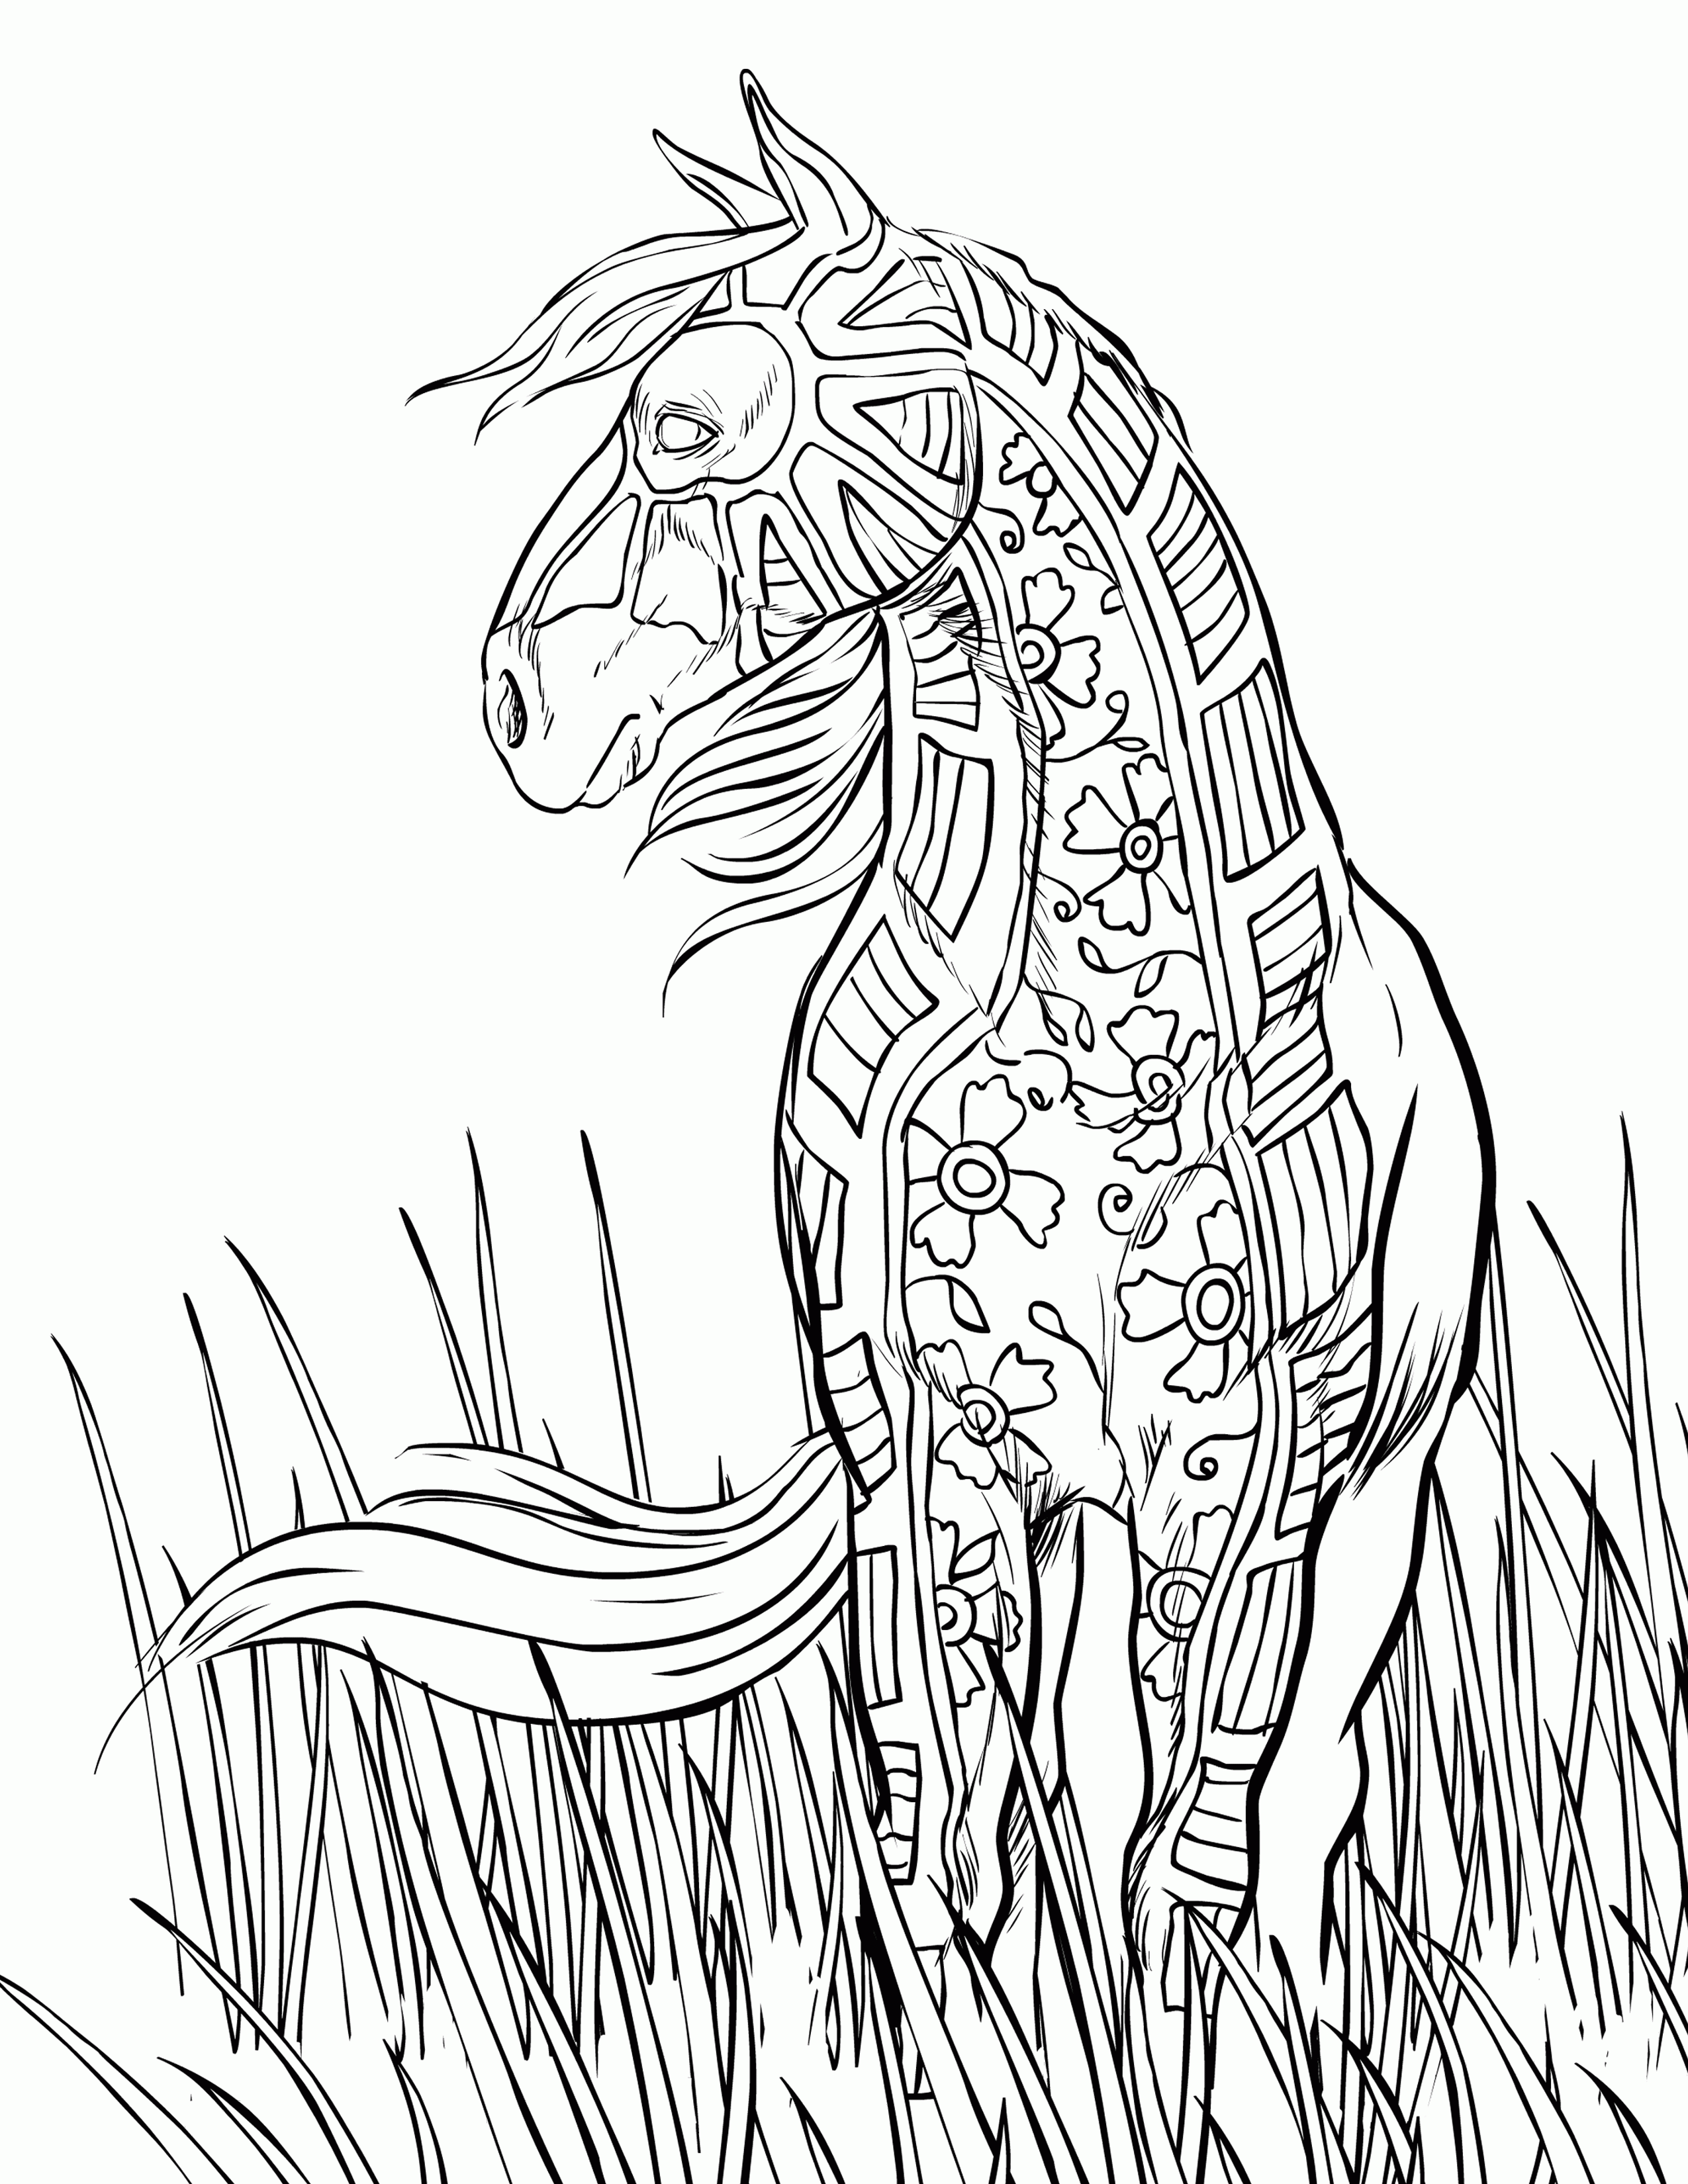 FREE HORSE COLORING PAGES | Selah Works - Artwork and Adult ...